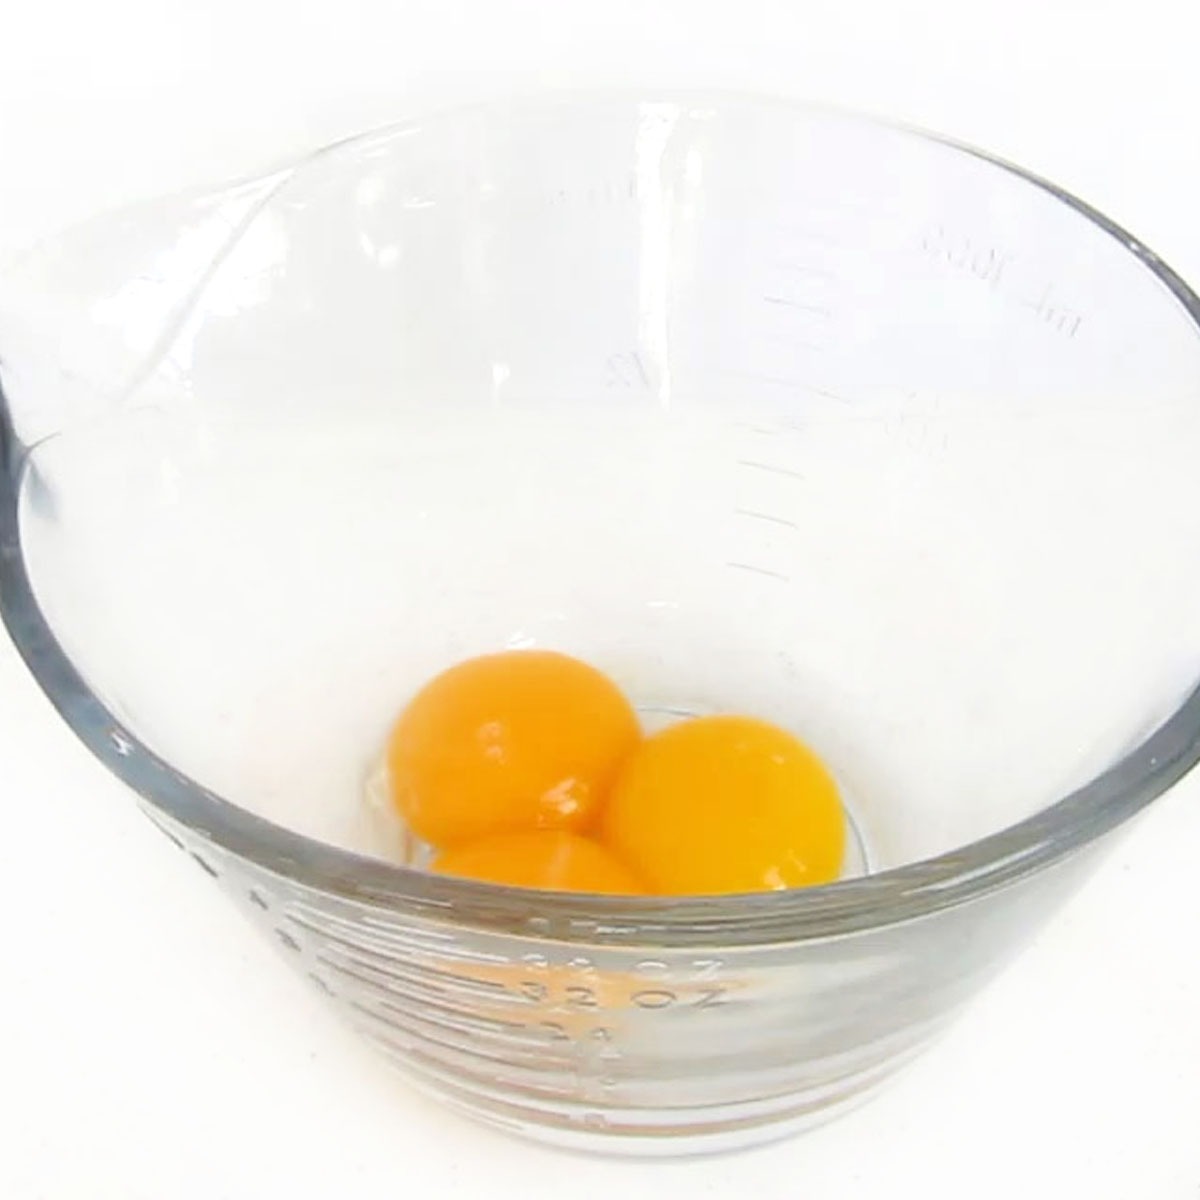 3 egg yolks in a mixing bowl